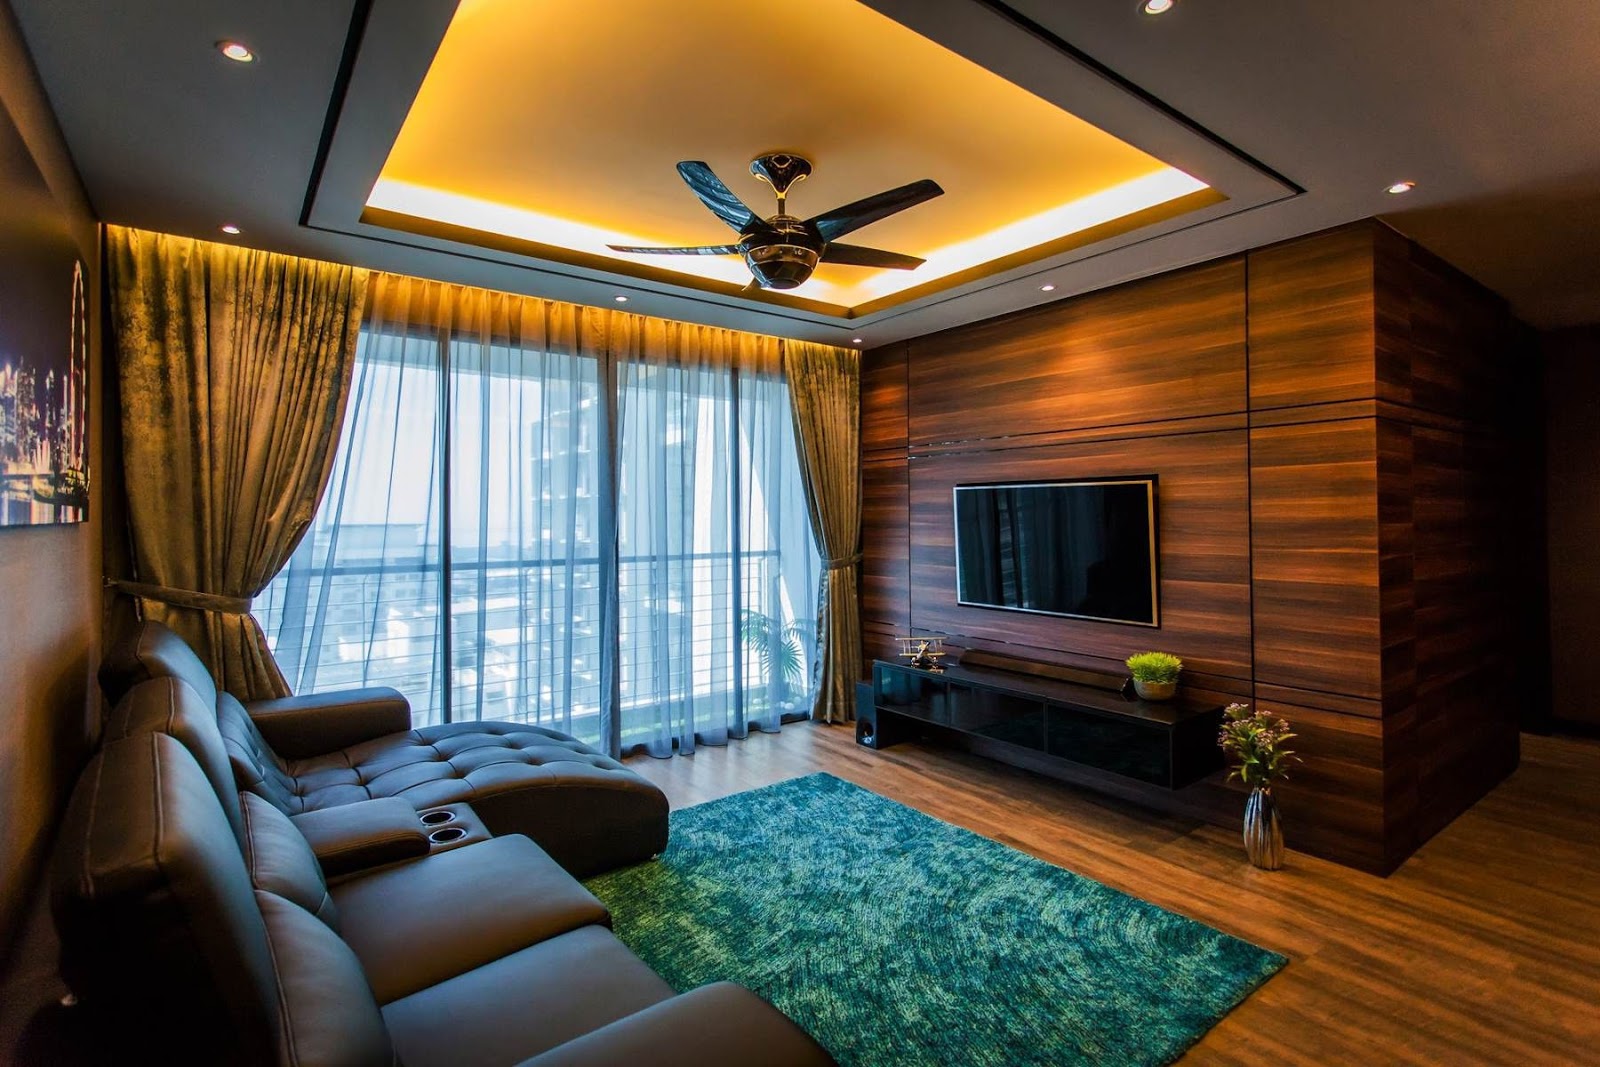 The Best 50 Gypsum Board Ceiling And False Ceiling Designs